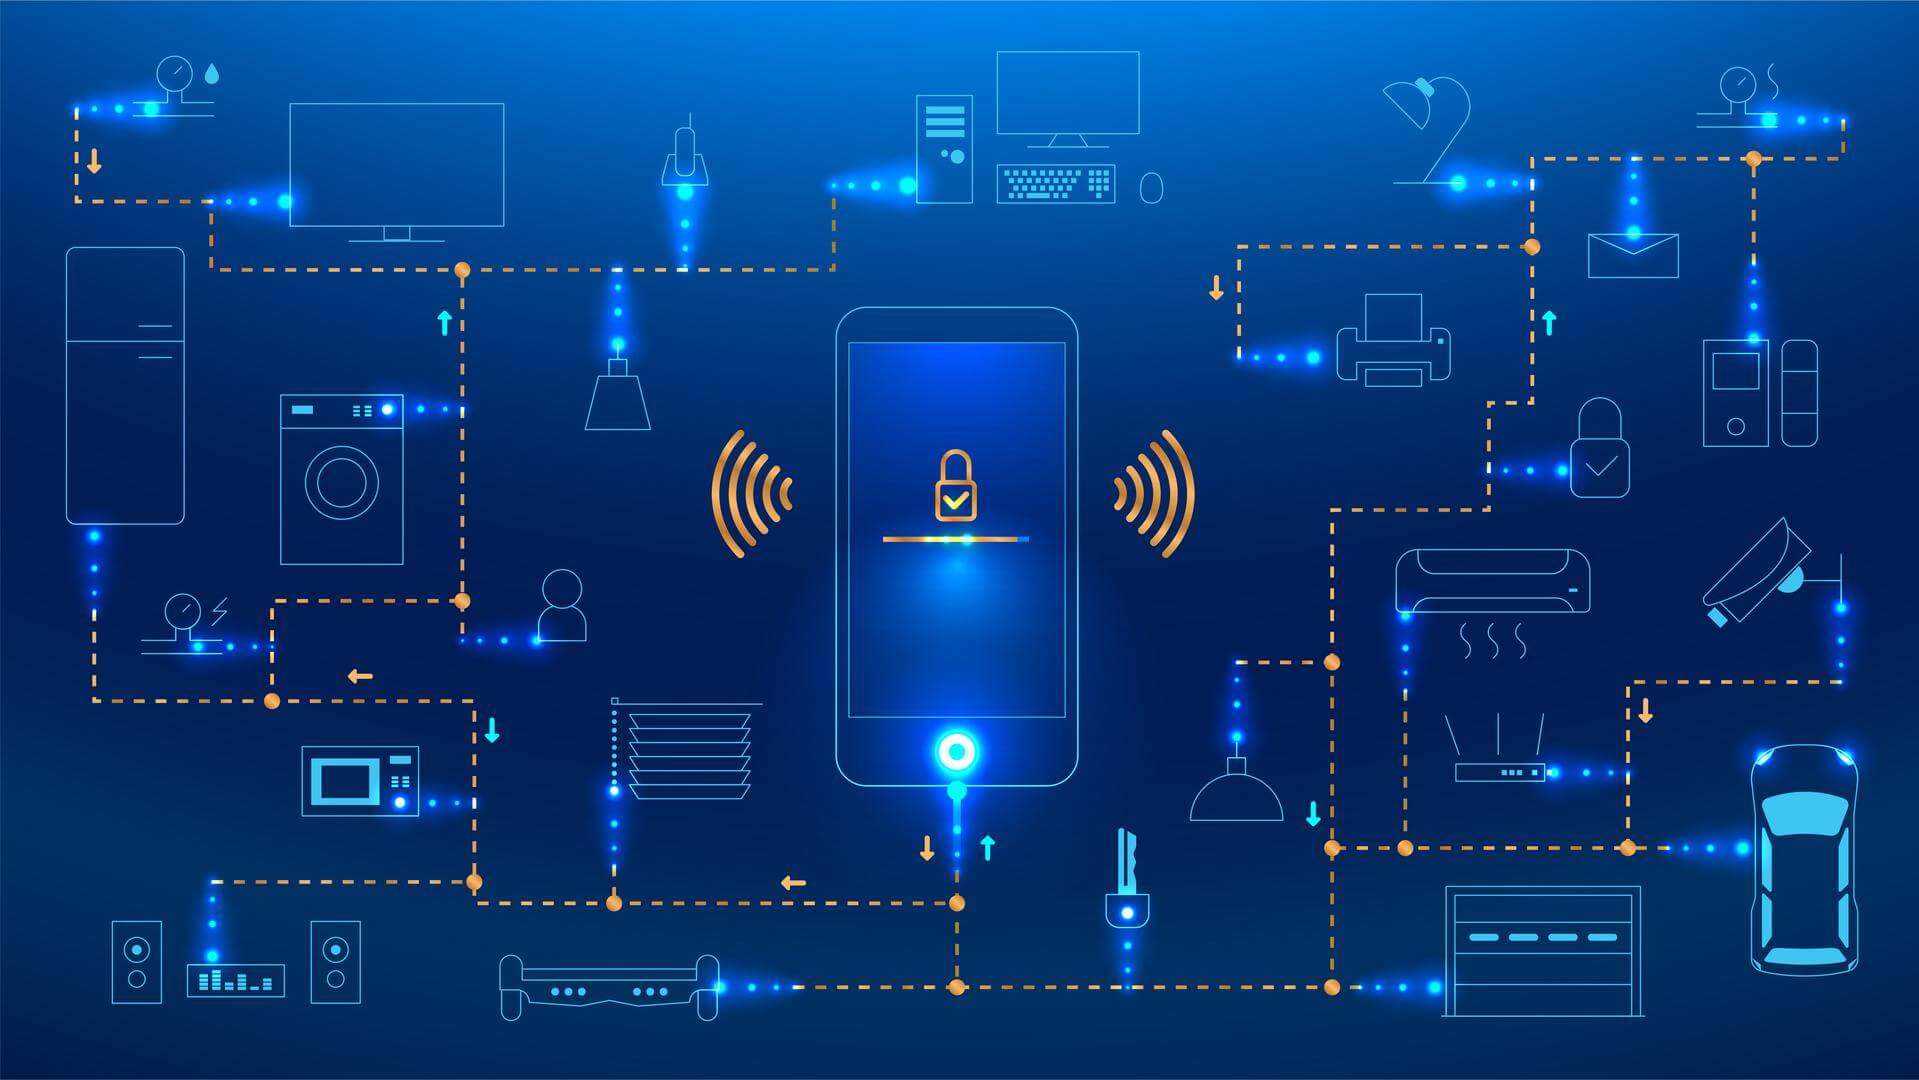 Organizations Can Gain Insights From IoT Connected Devices